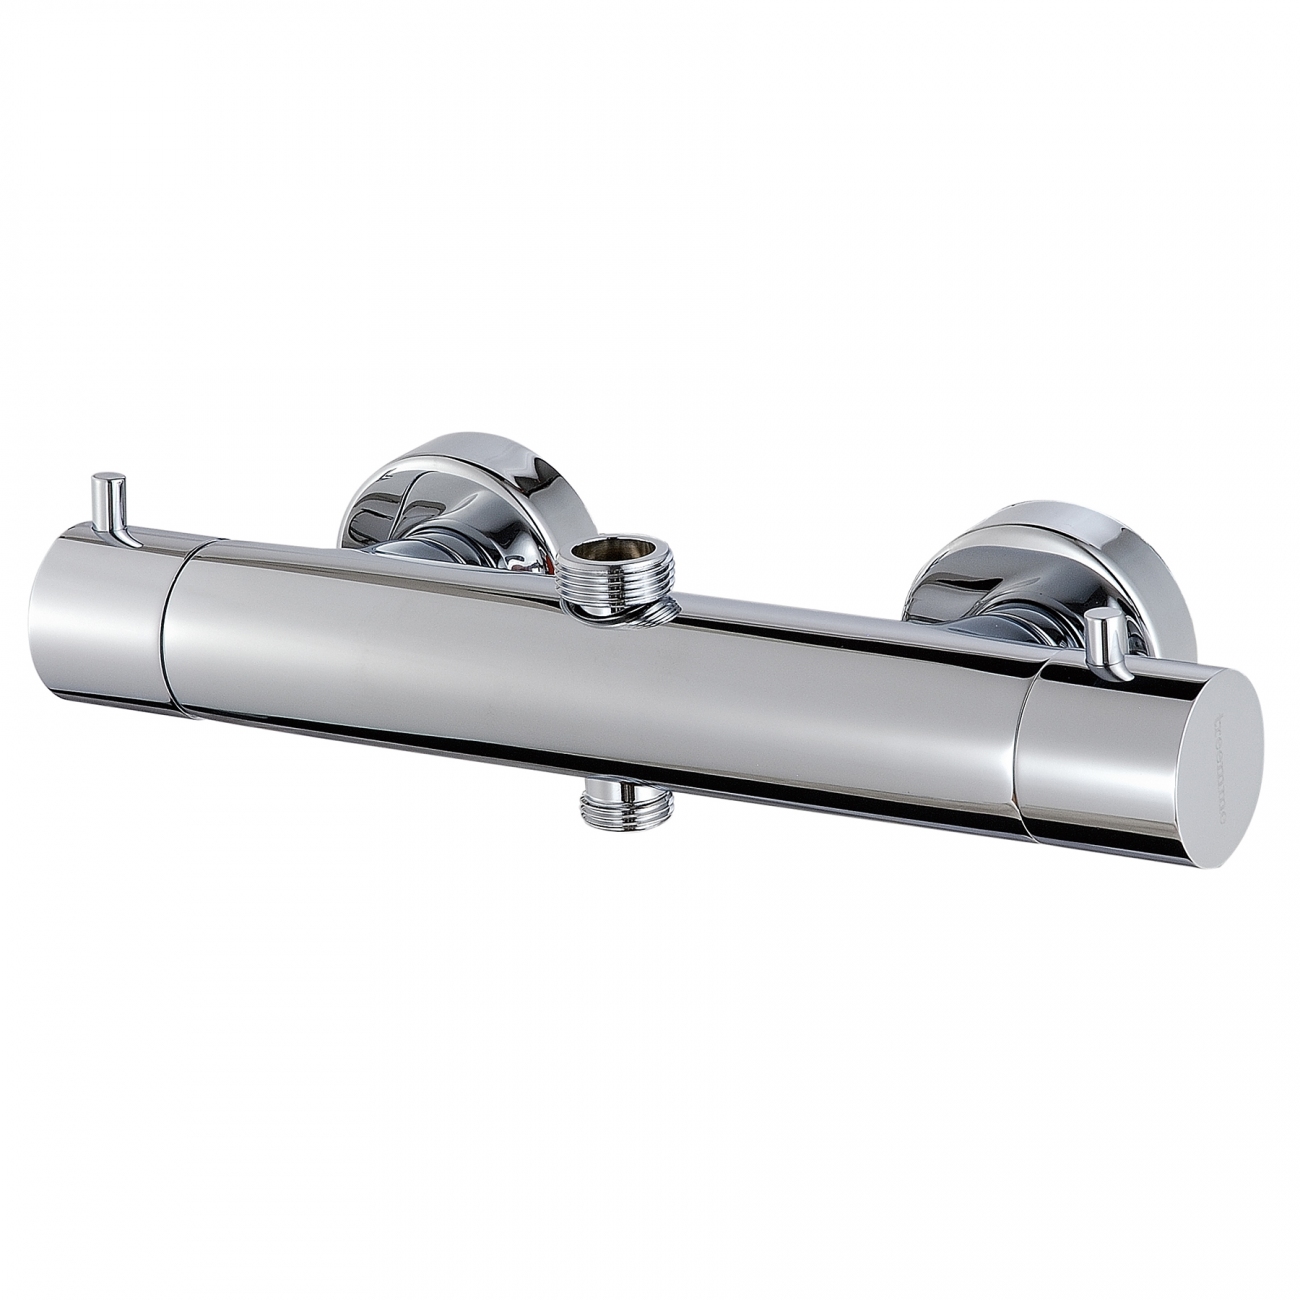 Treemme Up+ thermostatic shower mixer